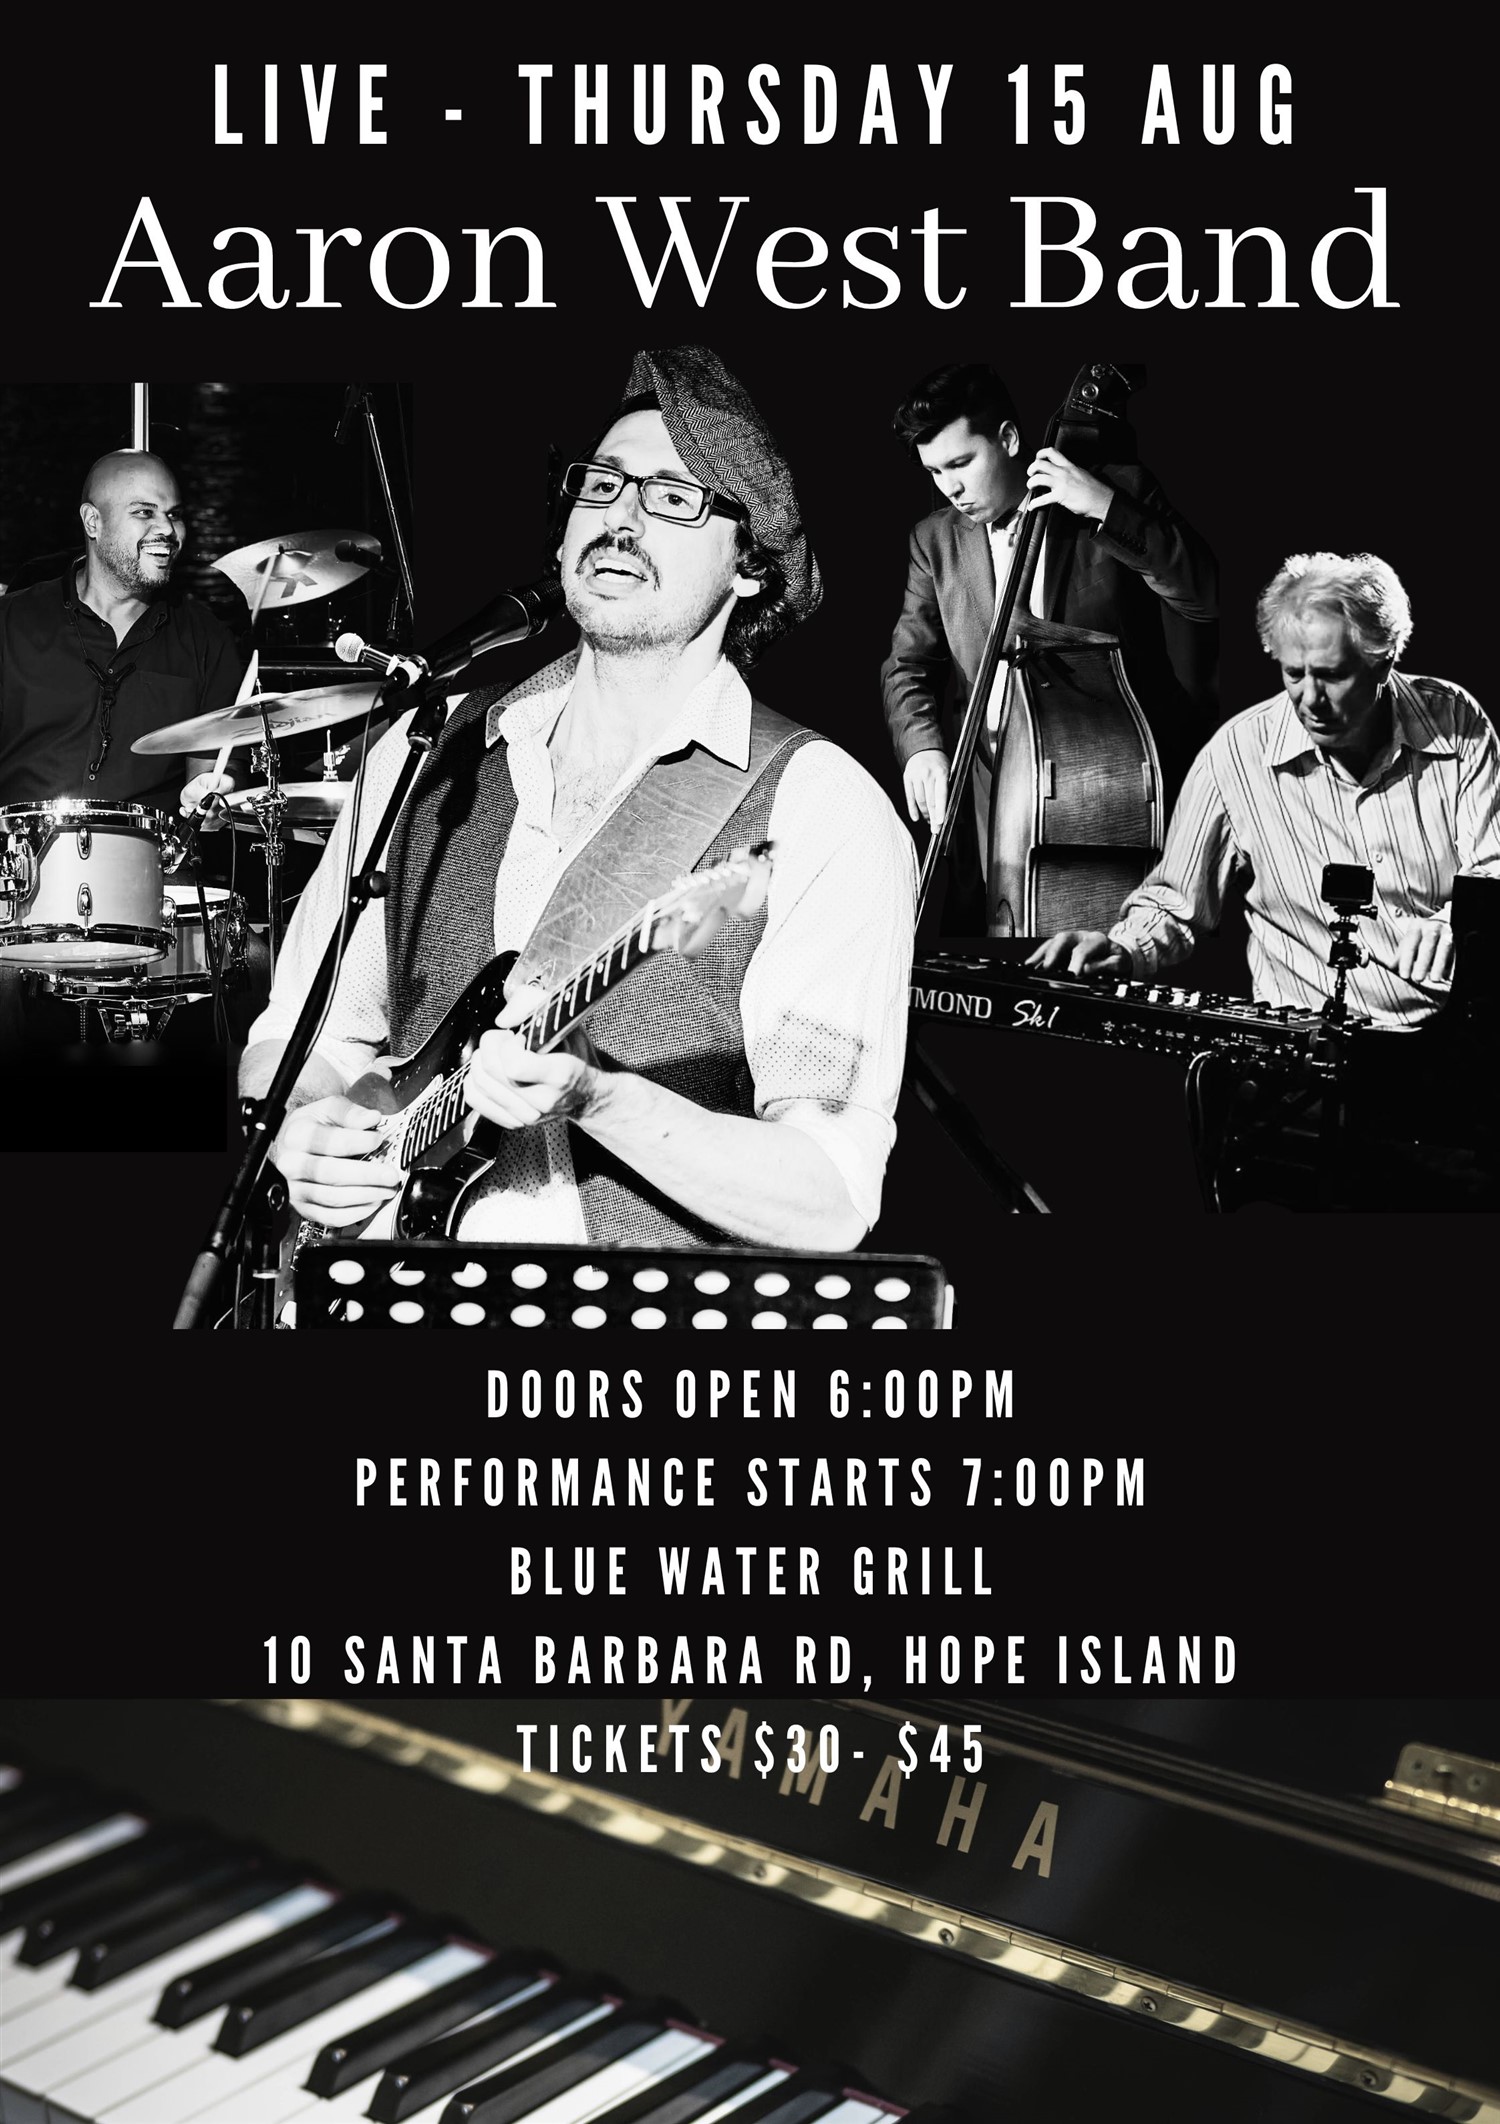 Aaron West Band  on Aug 15, 18:00@Hope Island Jazz - Blue Water Grill - Buy tickets and Get information on Hope Island Jazz hopeislandjazz.com.au